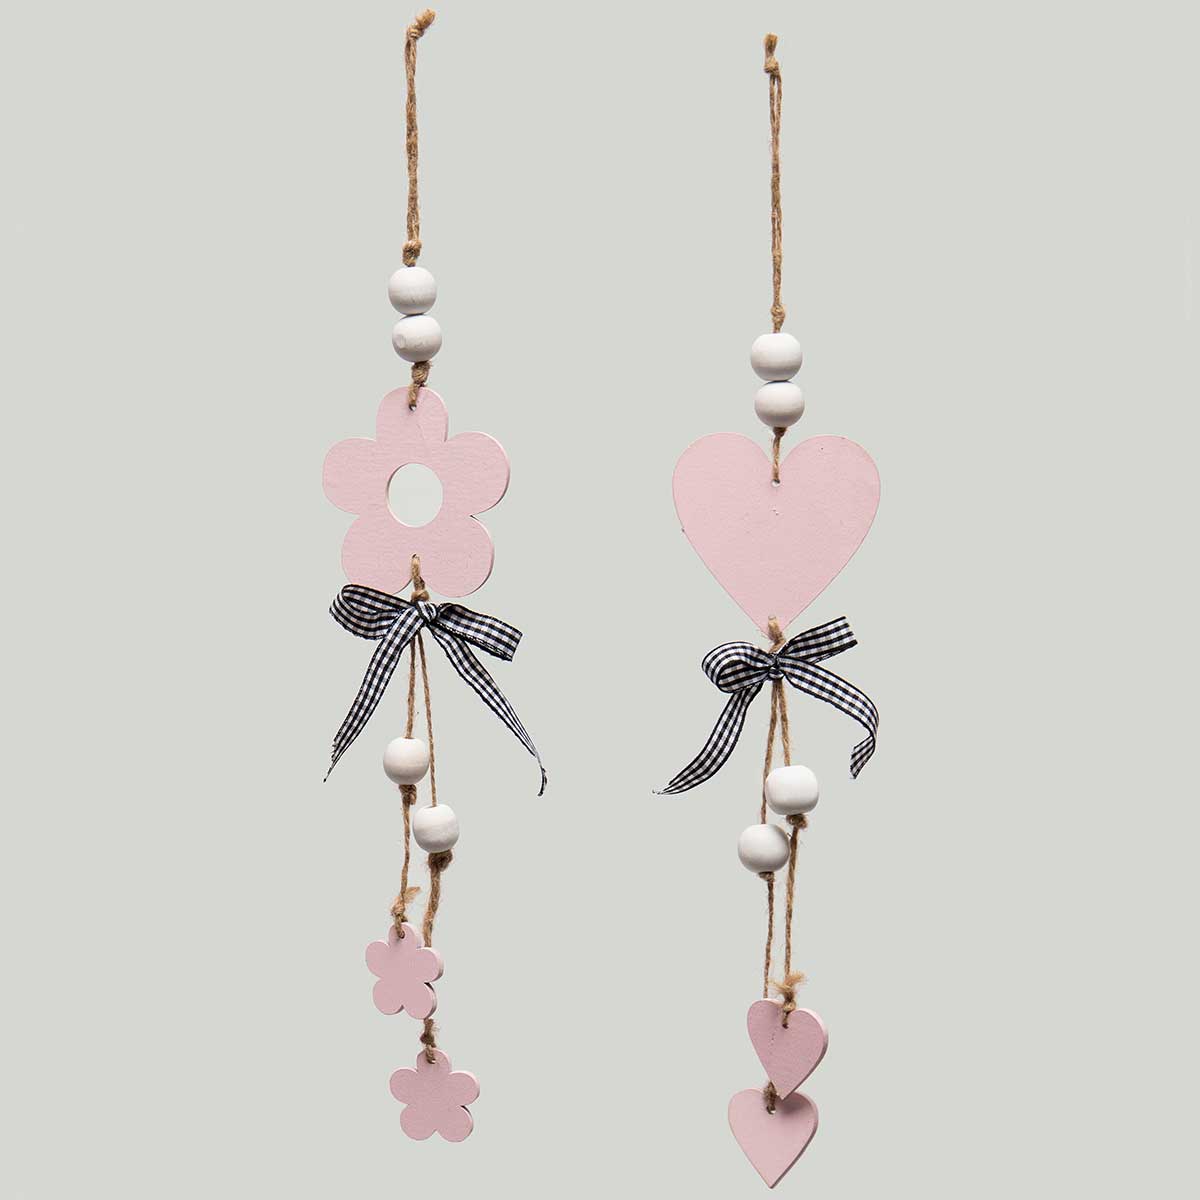 !HEART AND FLOWERS WOODEN HANG-UPS PINK/WHITE WITH TWINE